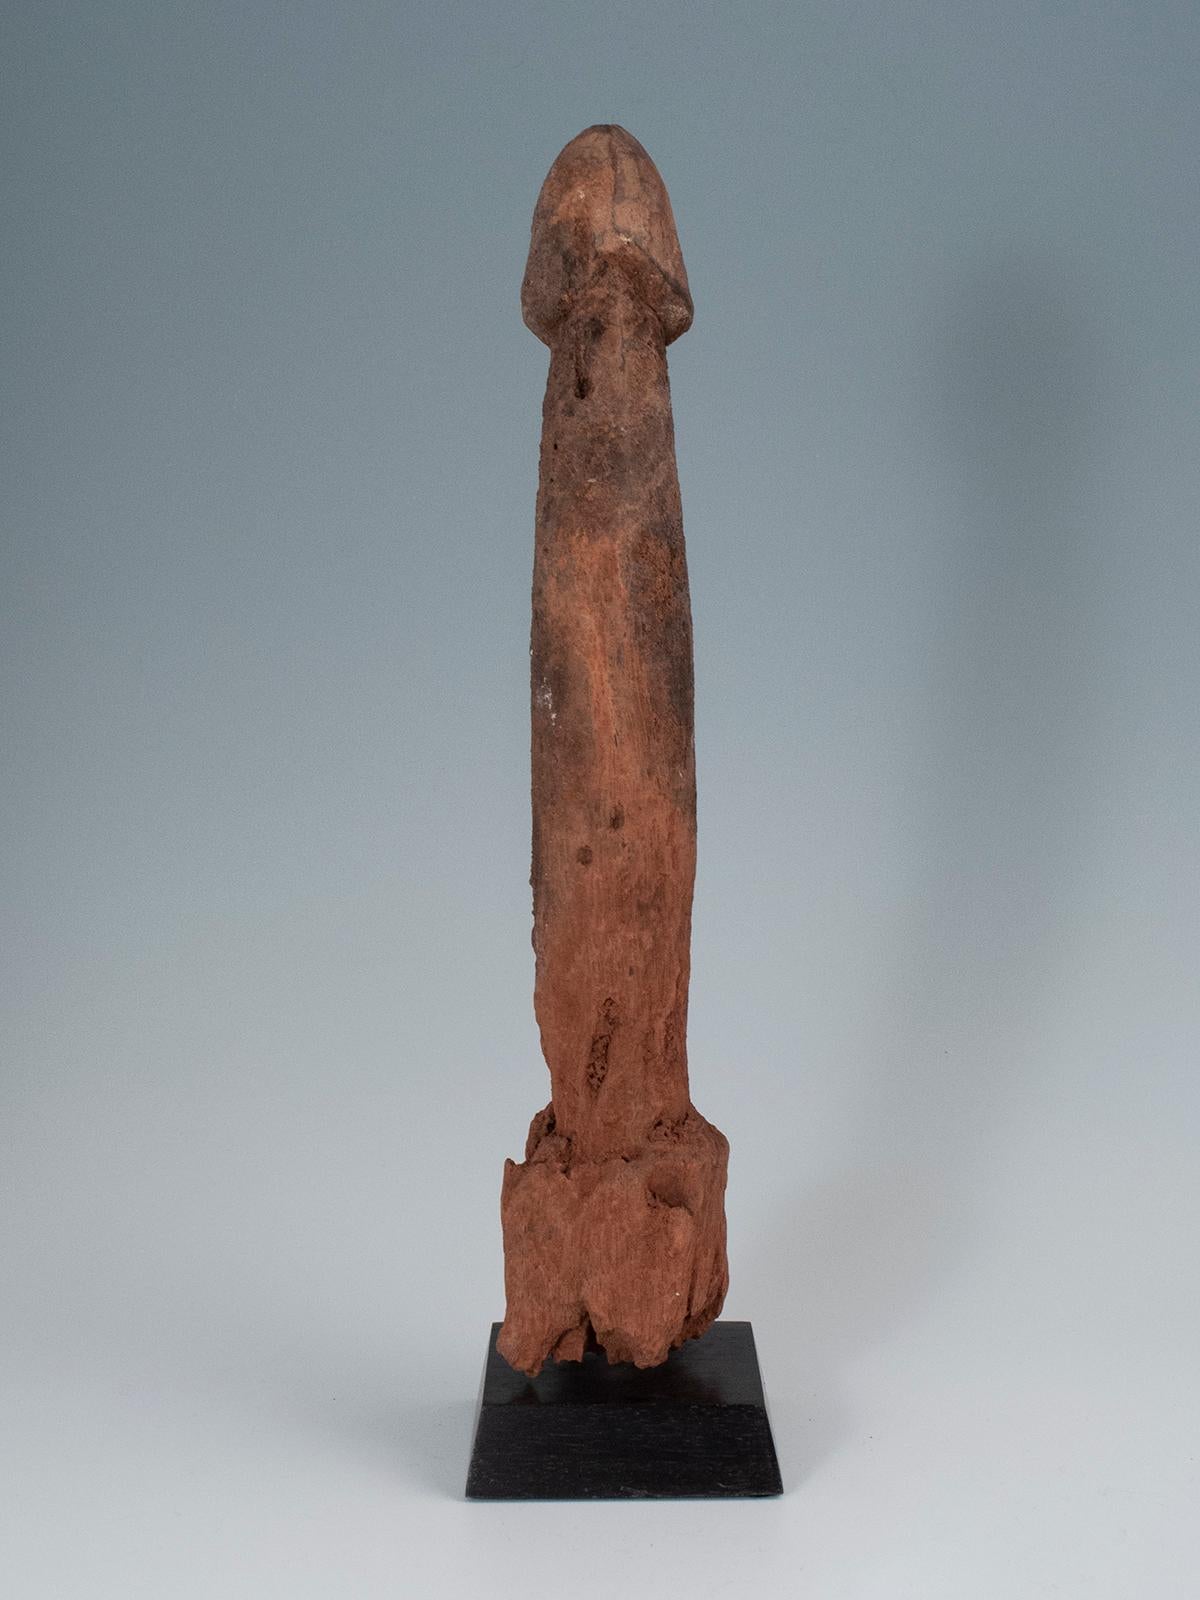 Late 19th-early 20th century wood Legba phallus, Fon people, West Africa

A large carved hardwood phallus from the Fon Tribe on the border of Togo and Ghana. These are called Legba, named after a deity, and were placed in the ground to stimulate